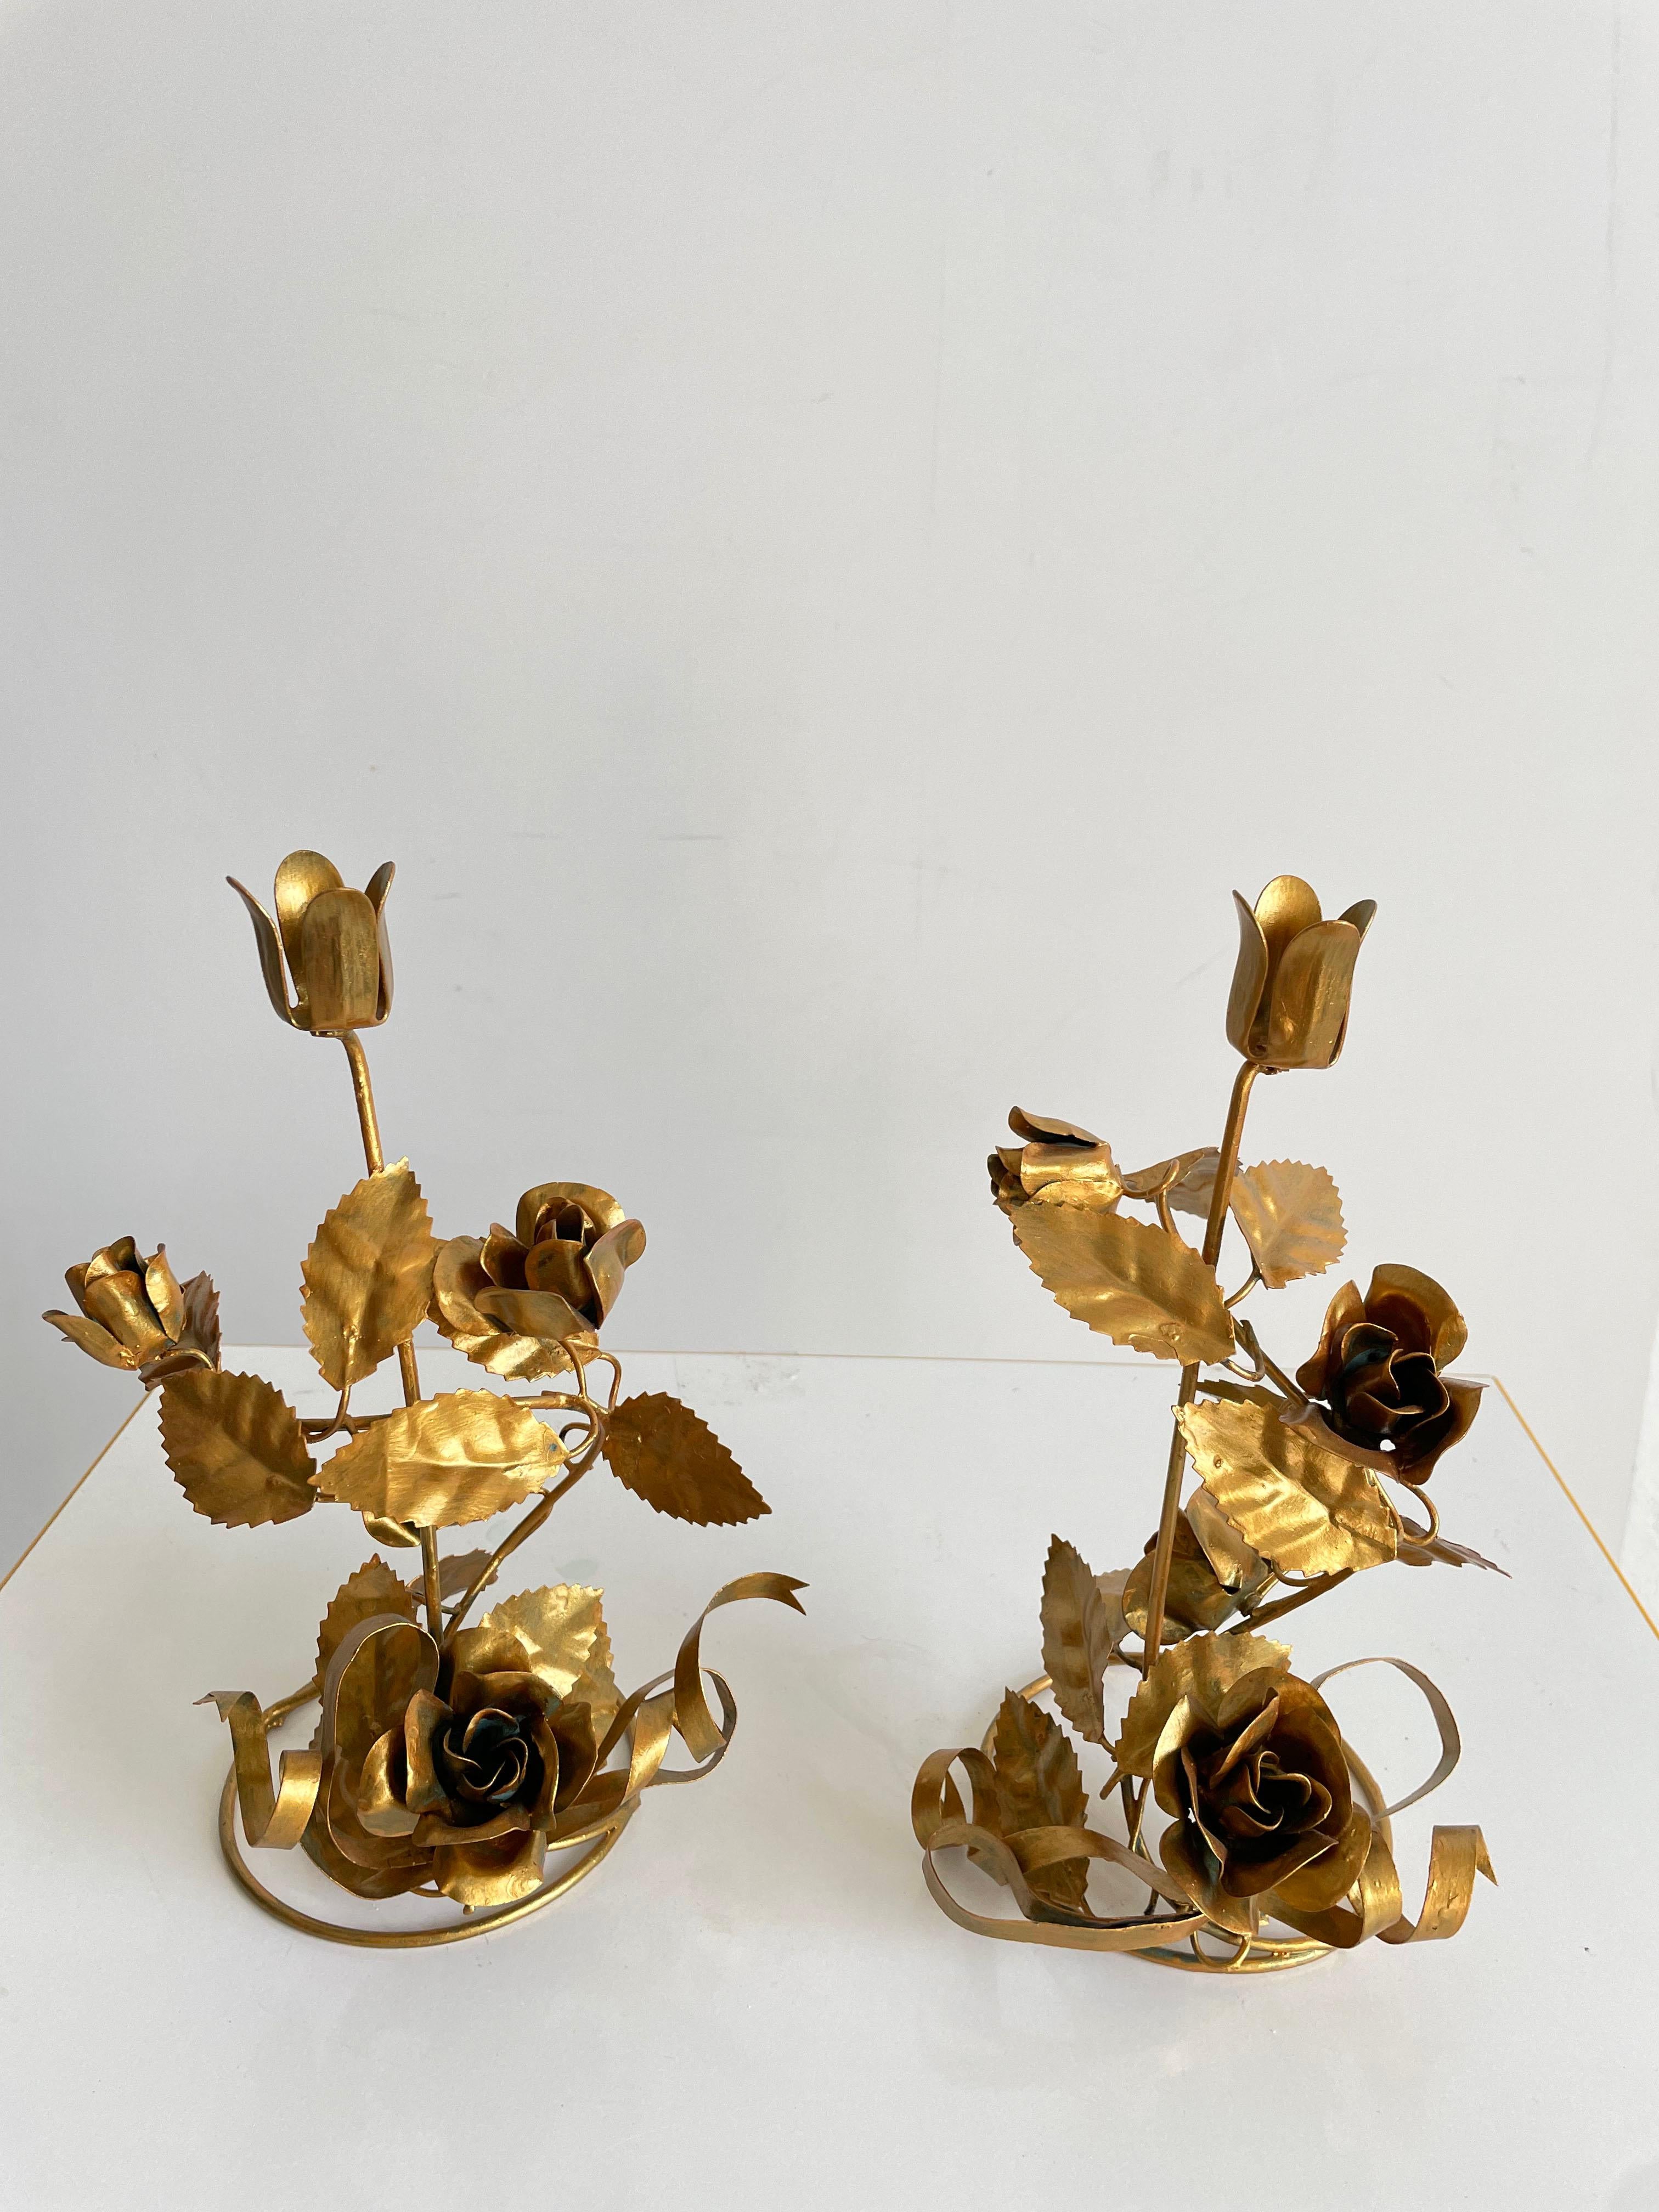 Pair of vintage Italian candlesticks from the 1960s.

Delicate gilt metal floral design, each candlestick has one flower shaped candle holder at the top measuring 2 cm in diameter.

The candlesticks are in very good original condition, with